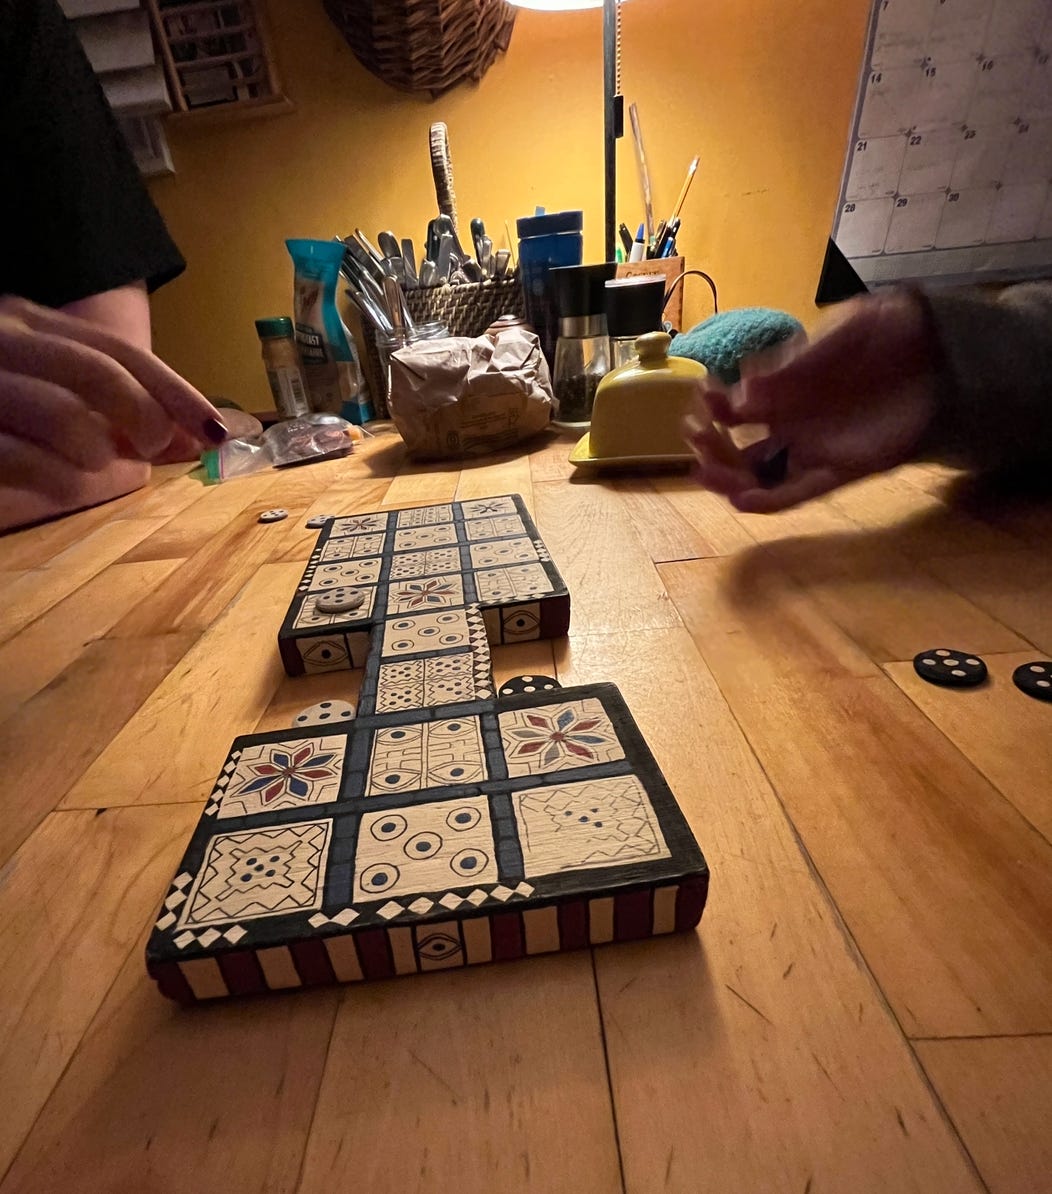 A funny shaped board game sits on the table. It is a long painted board with many squares painted in different patterns